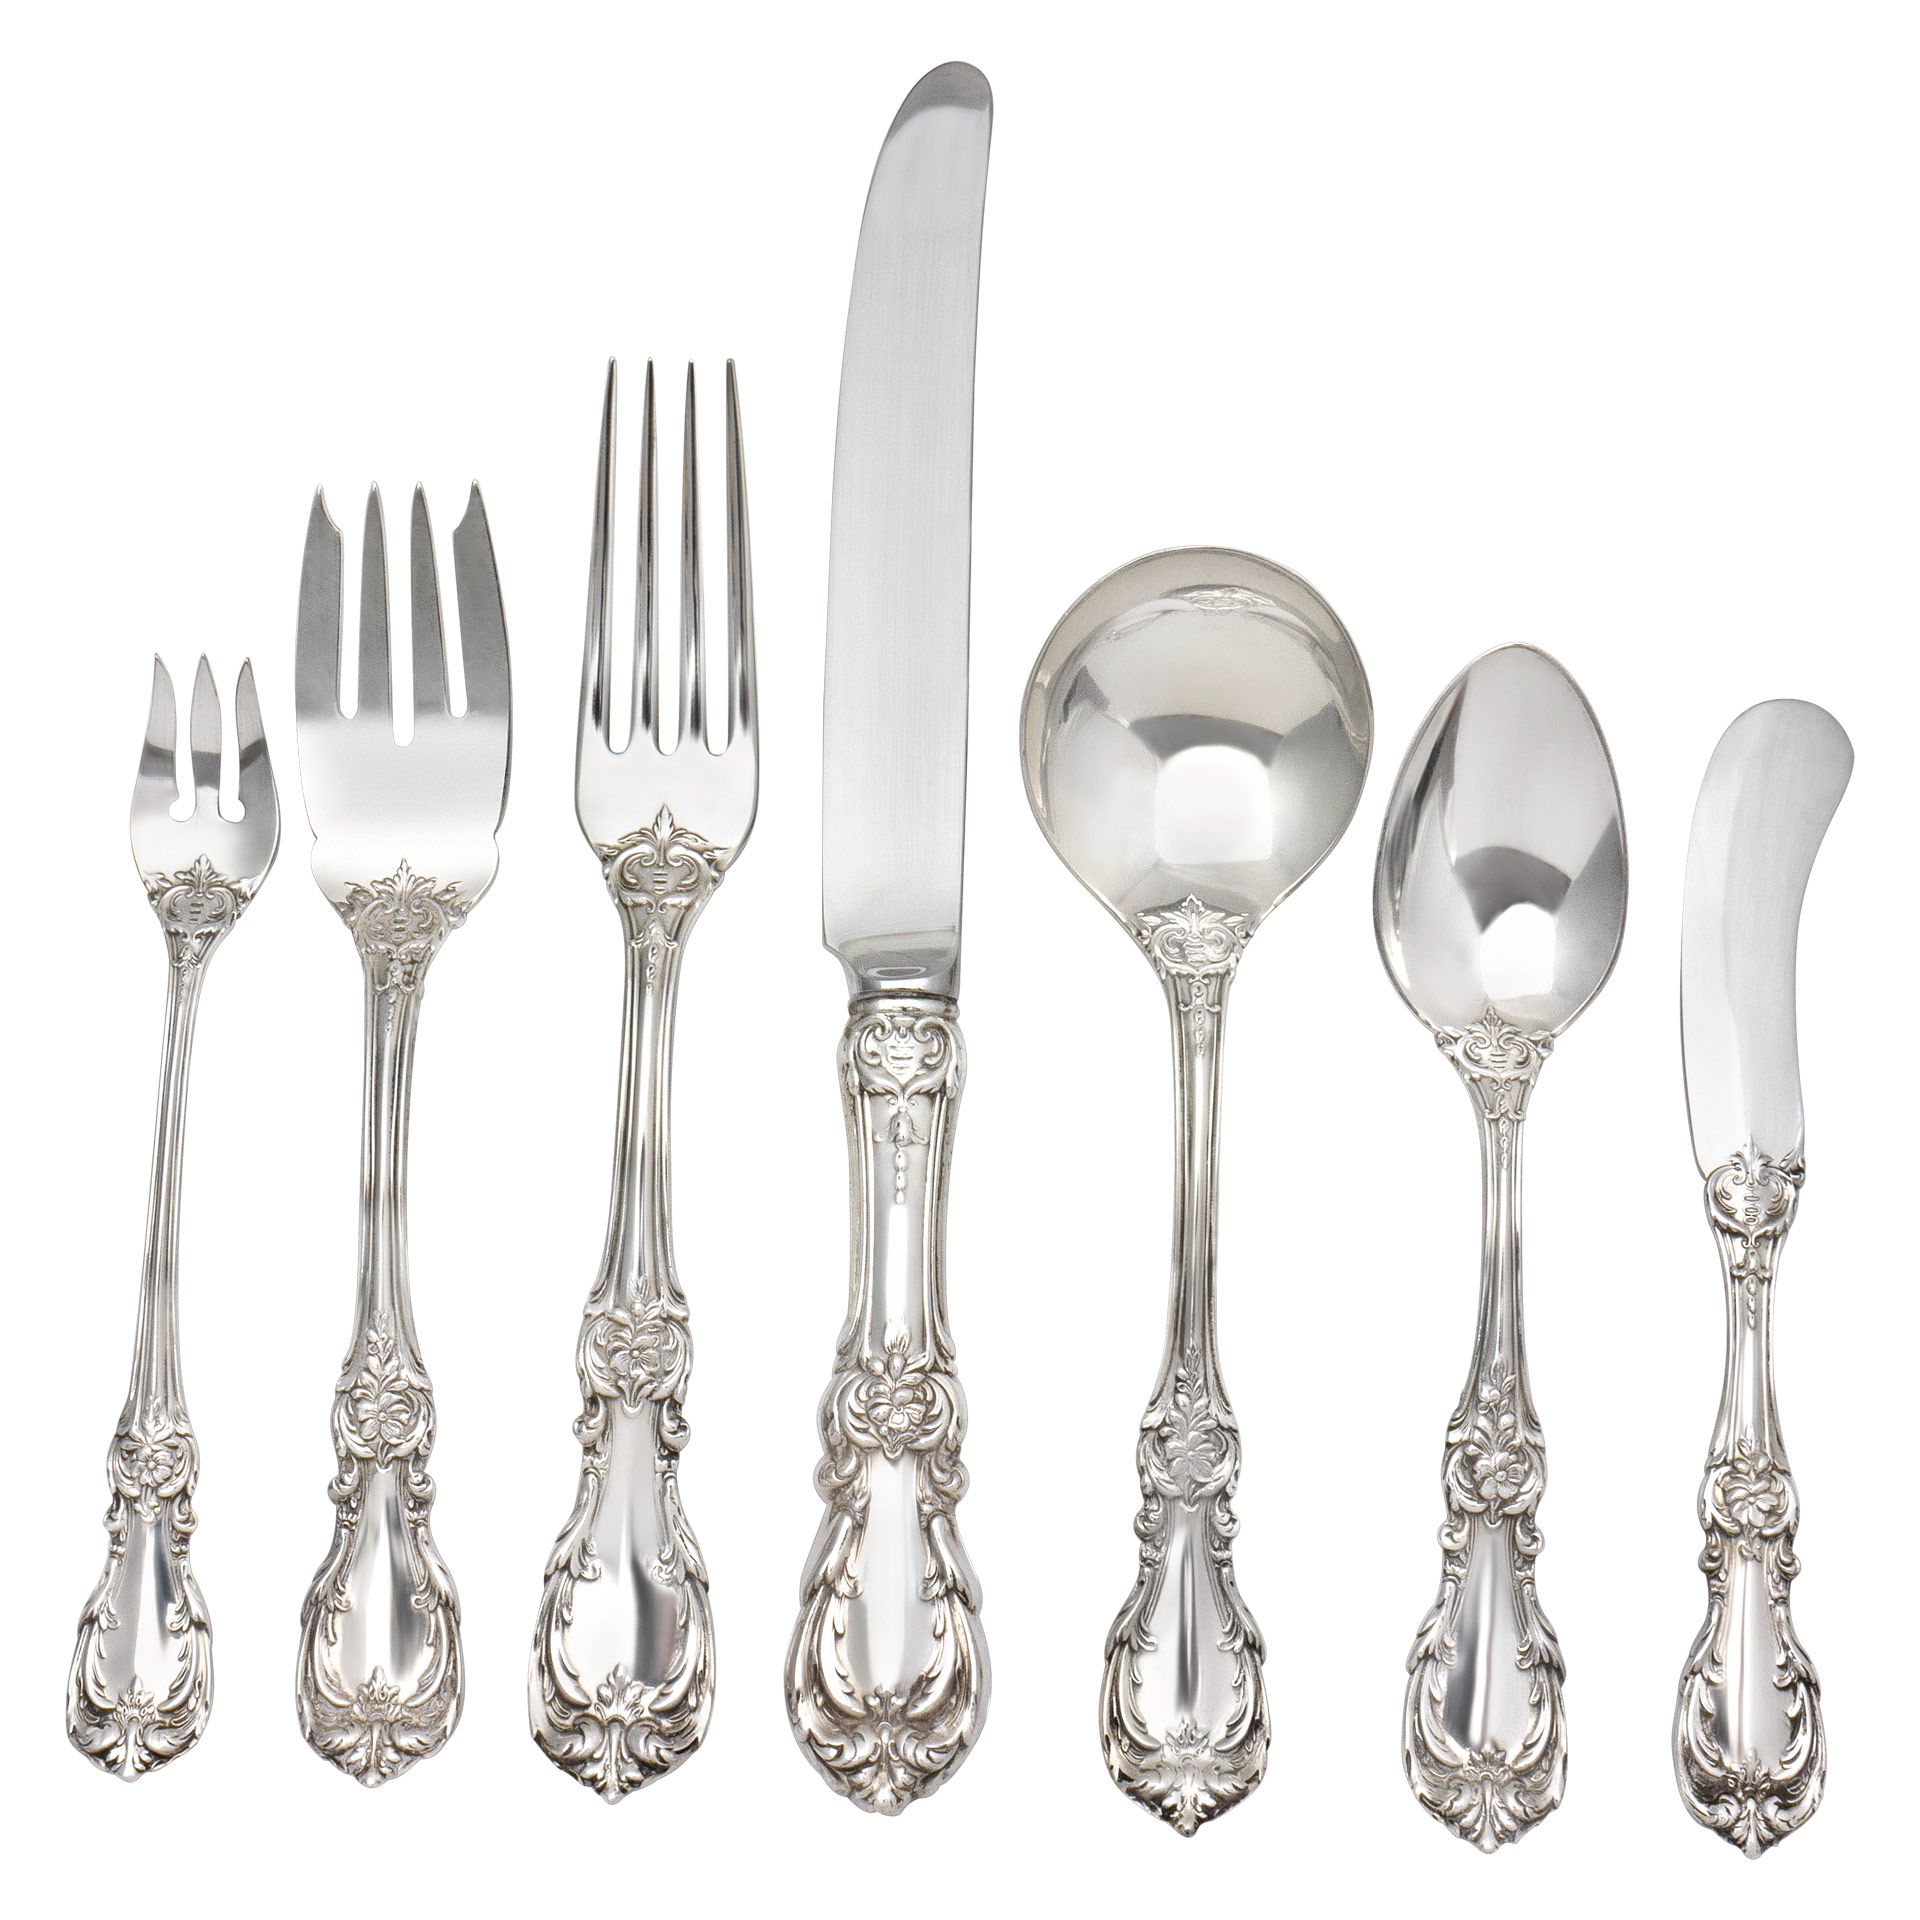 BURGUNDY" sterling silver flatware set,  Ptd in 1949 by REED & BARTON- 7 Place Settings for 12 + 7 serving pieces. Over 120 ounces troy sterling silver